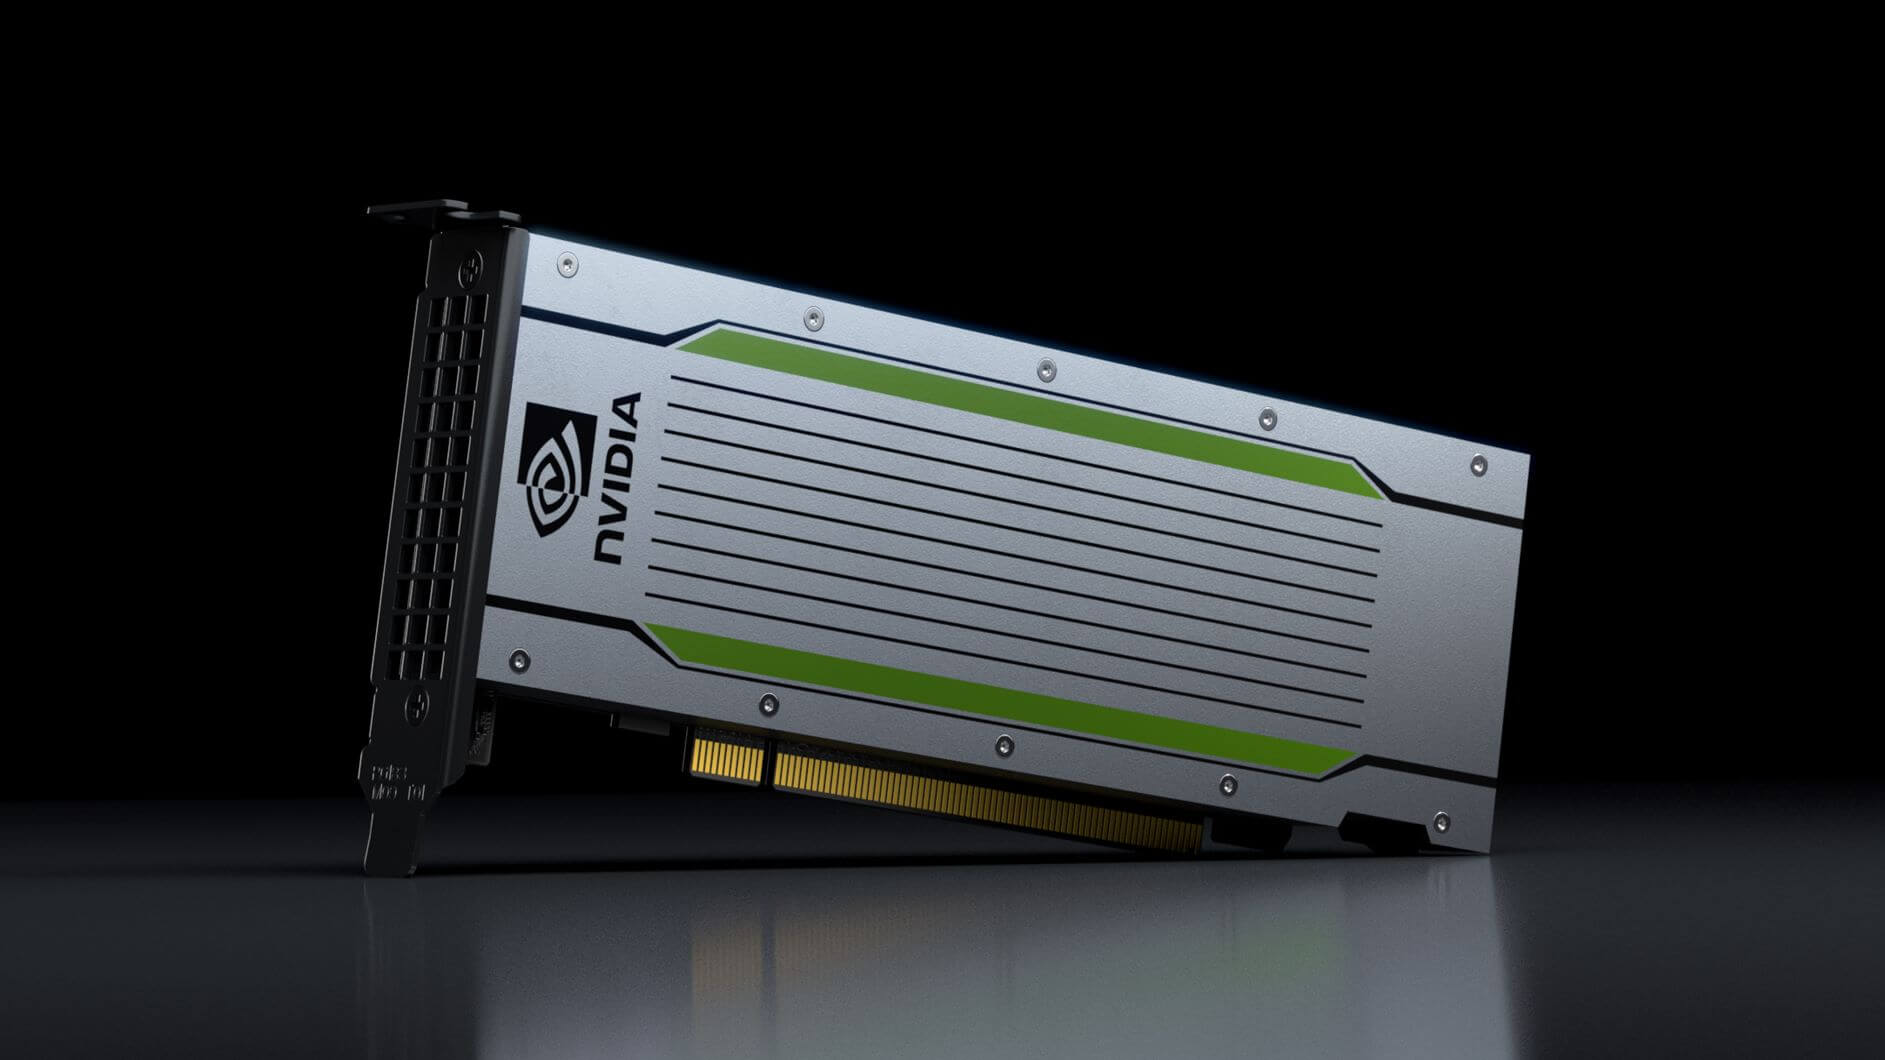 Nvidia Tesla T4 GPU accelerates AI inferences without becoming power-hungry